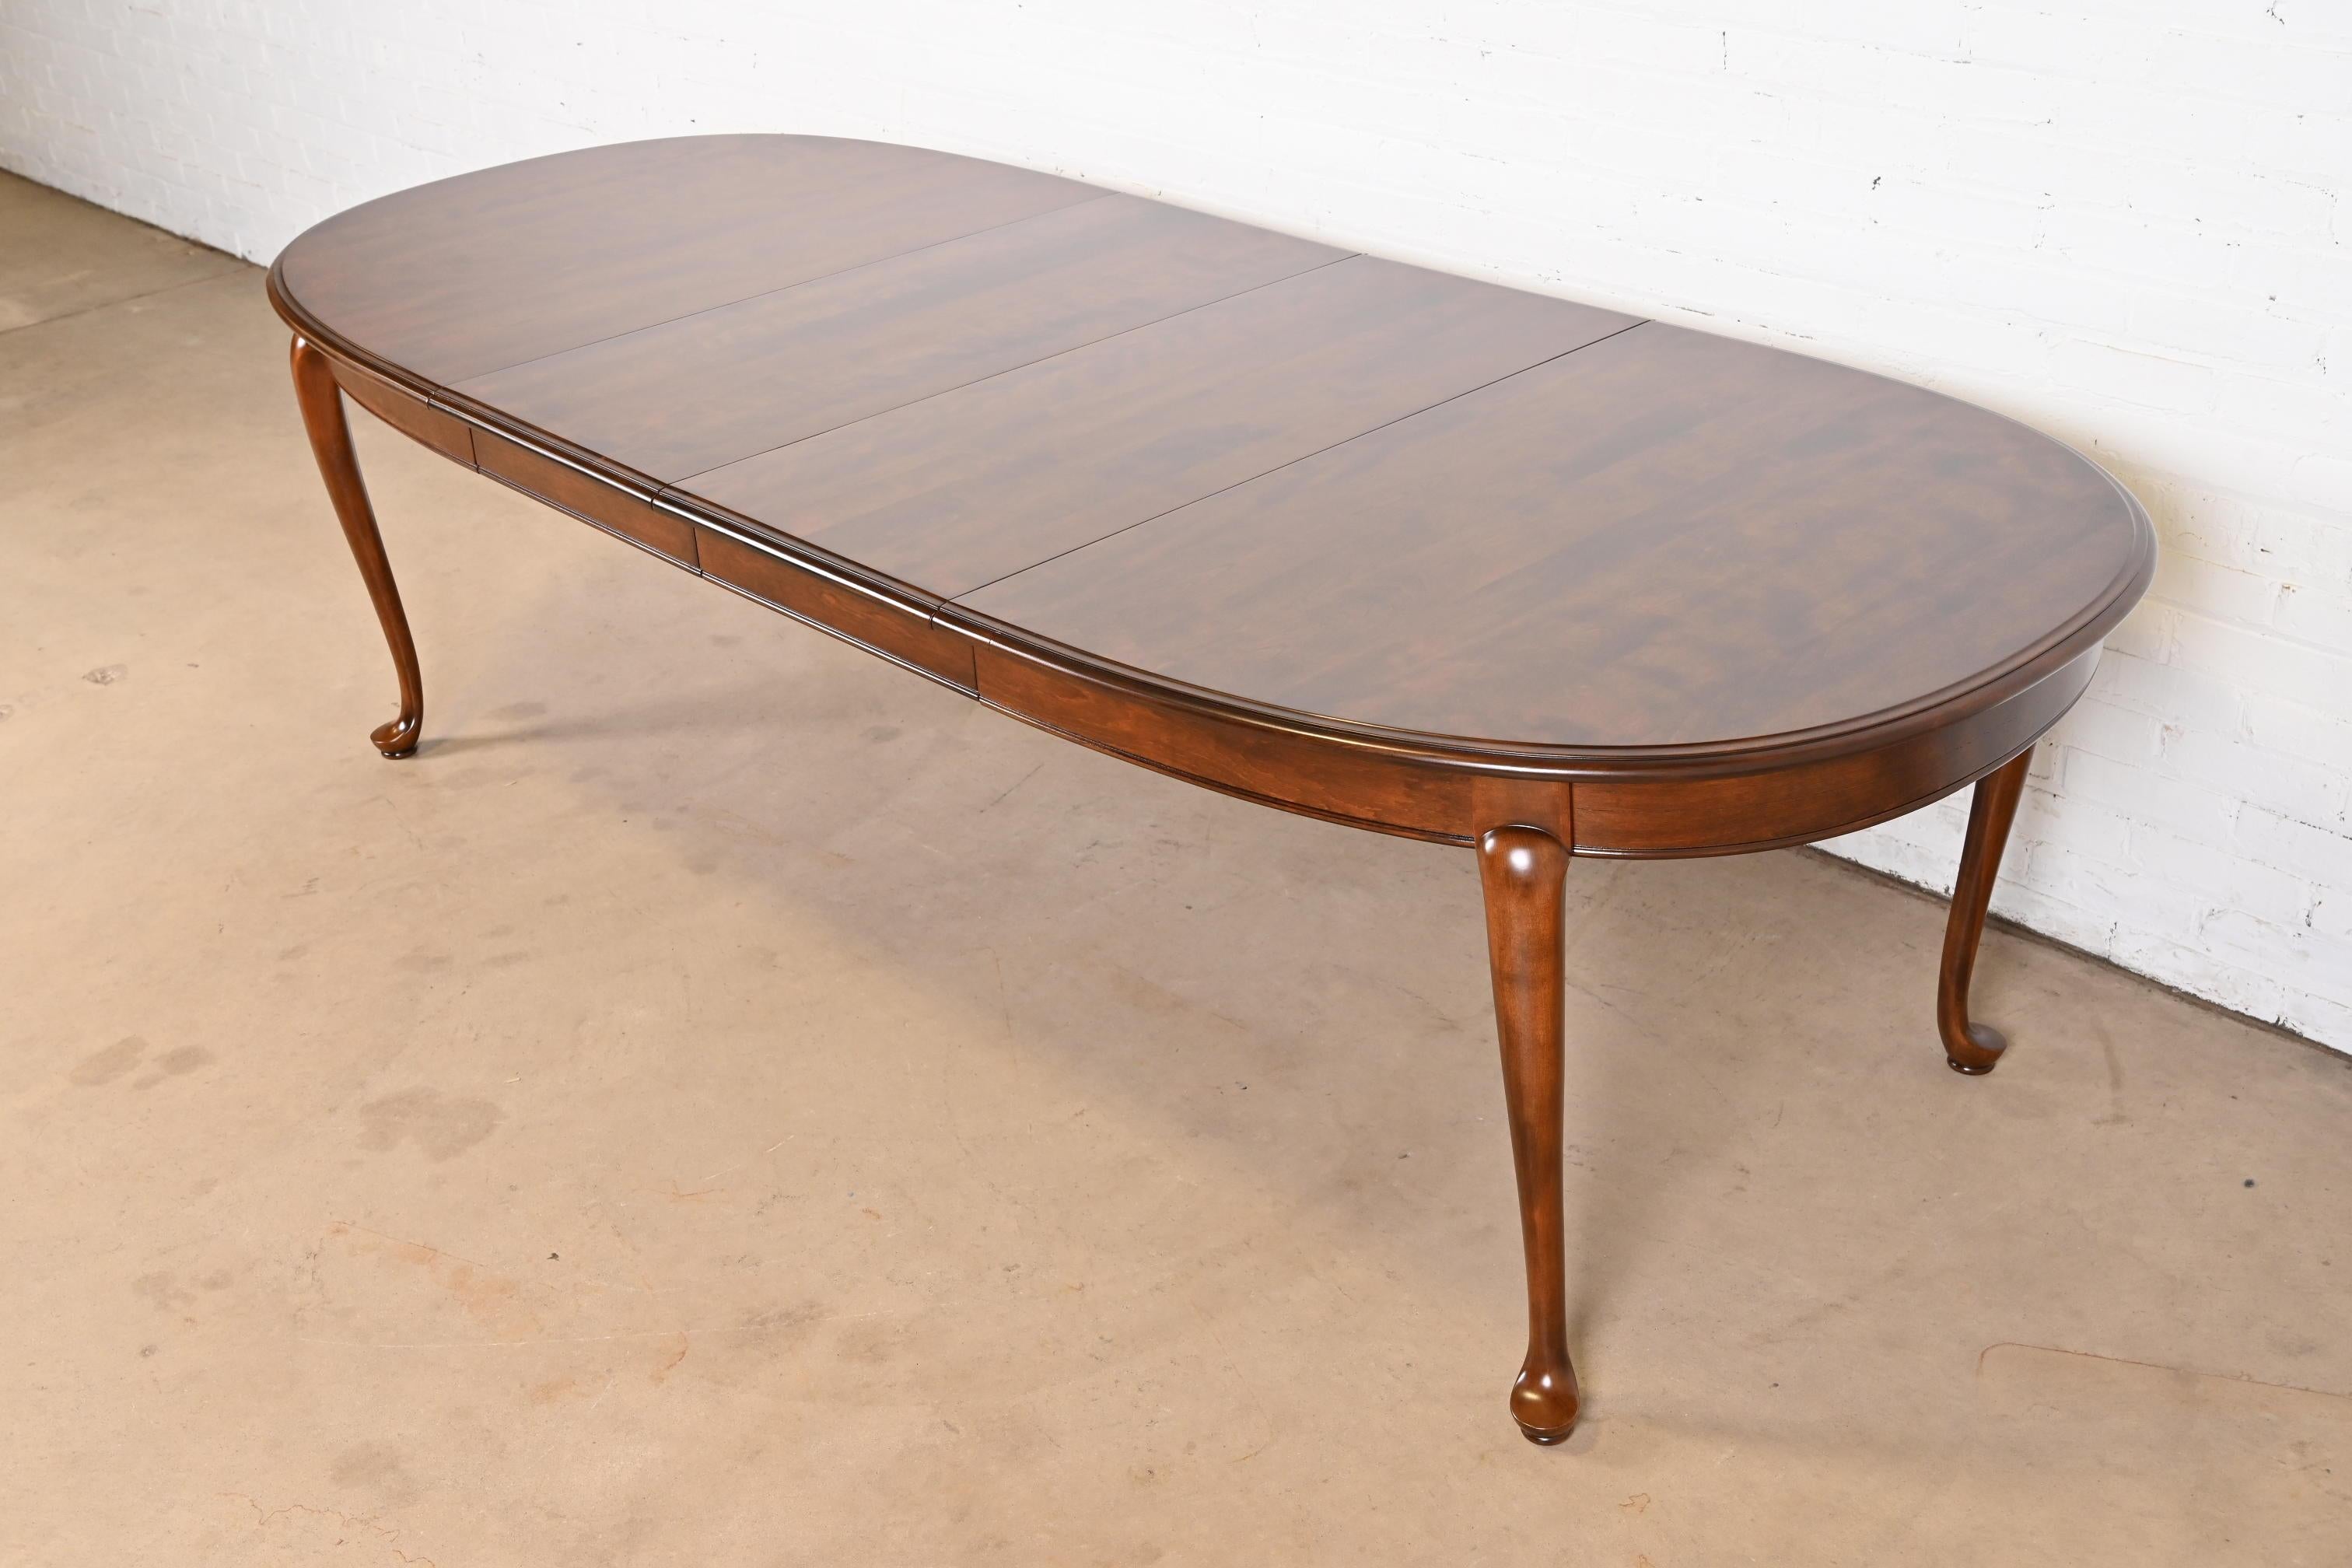 A gorgeous Queen Anne style solid cherry wood extension dining table

USA, Circa 1970s

Measures: 64